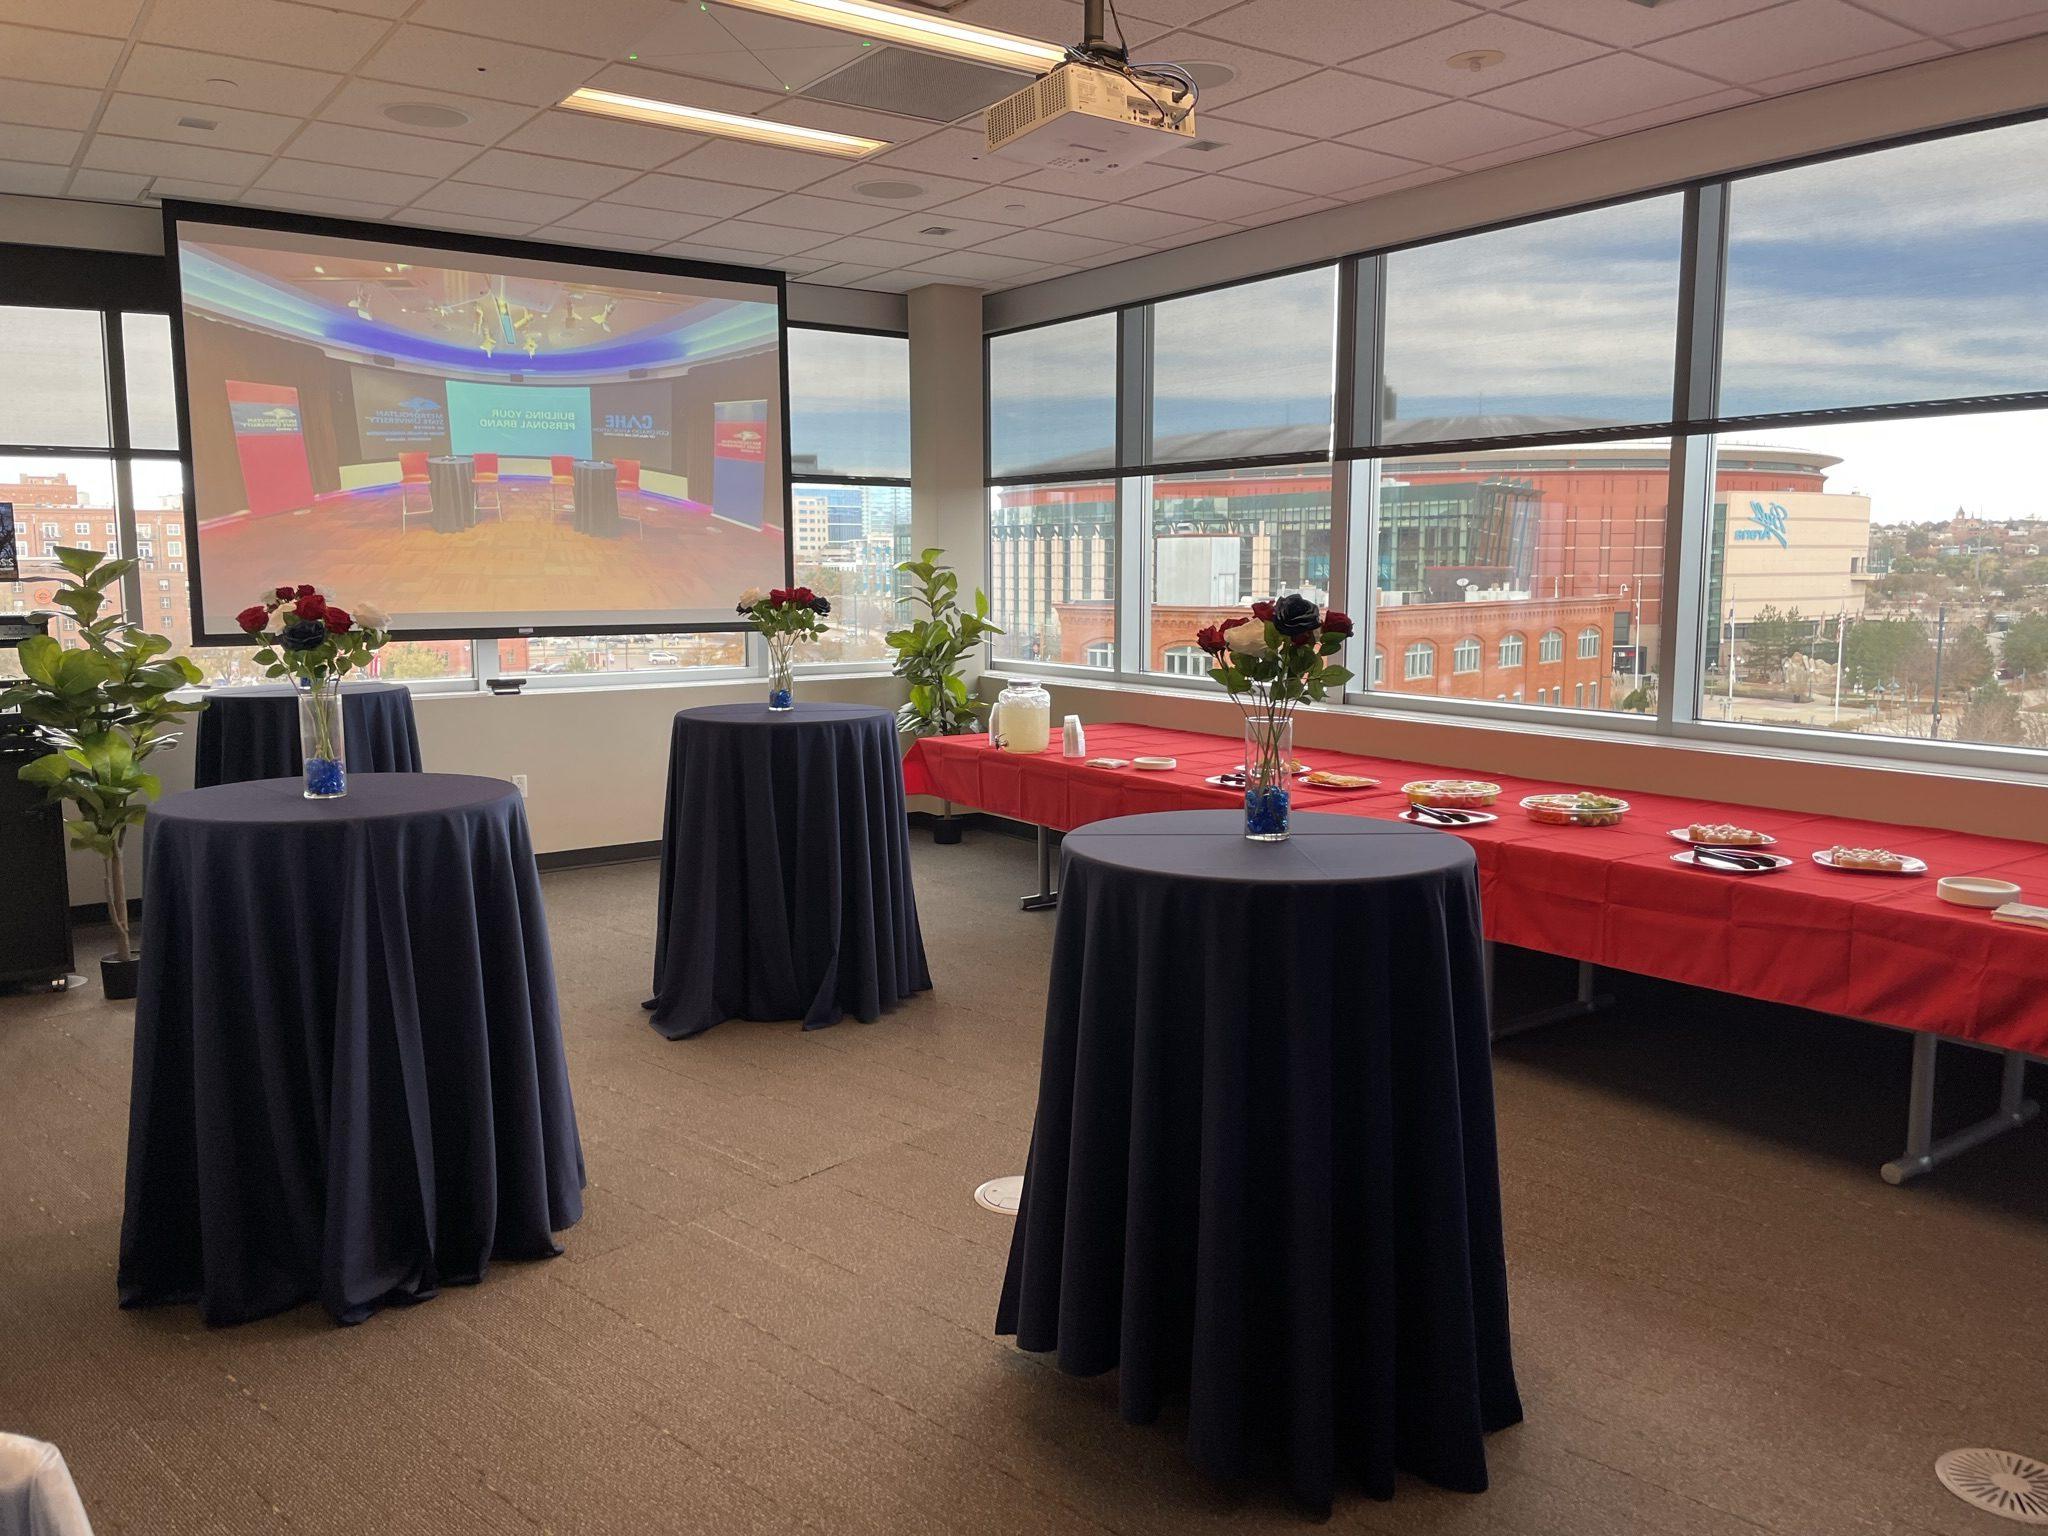 A breakout room setup for conversation opportunities before, during, or after an event.